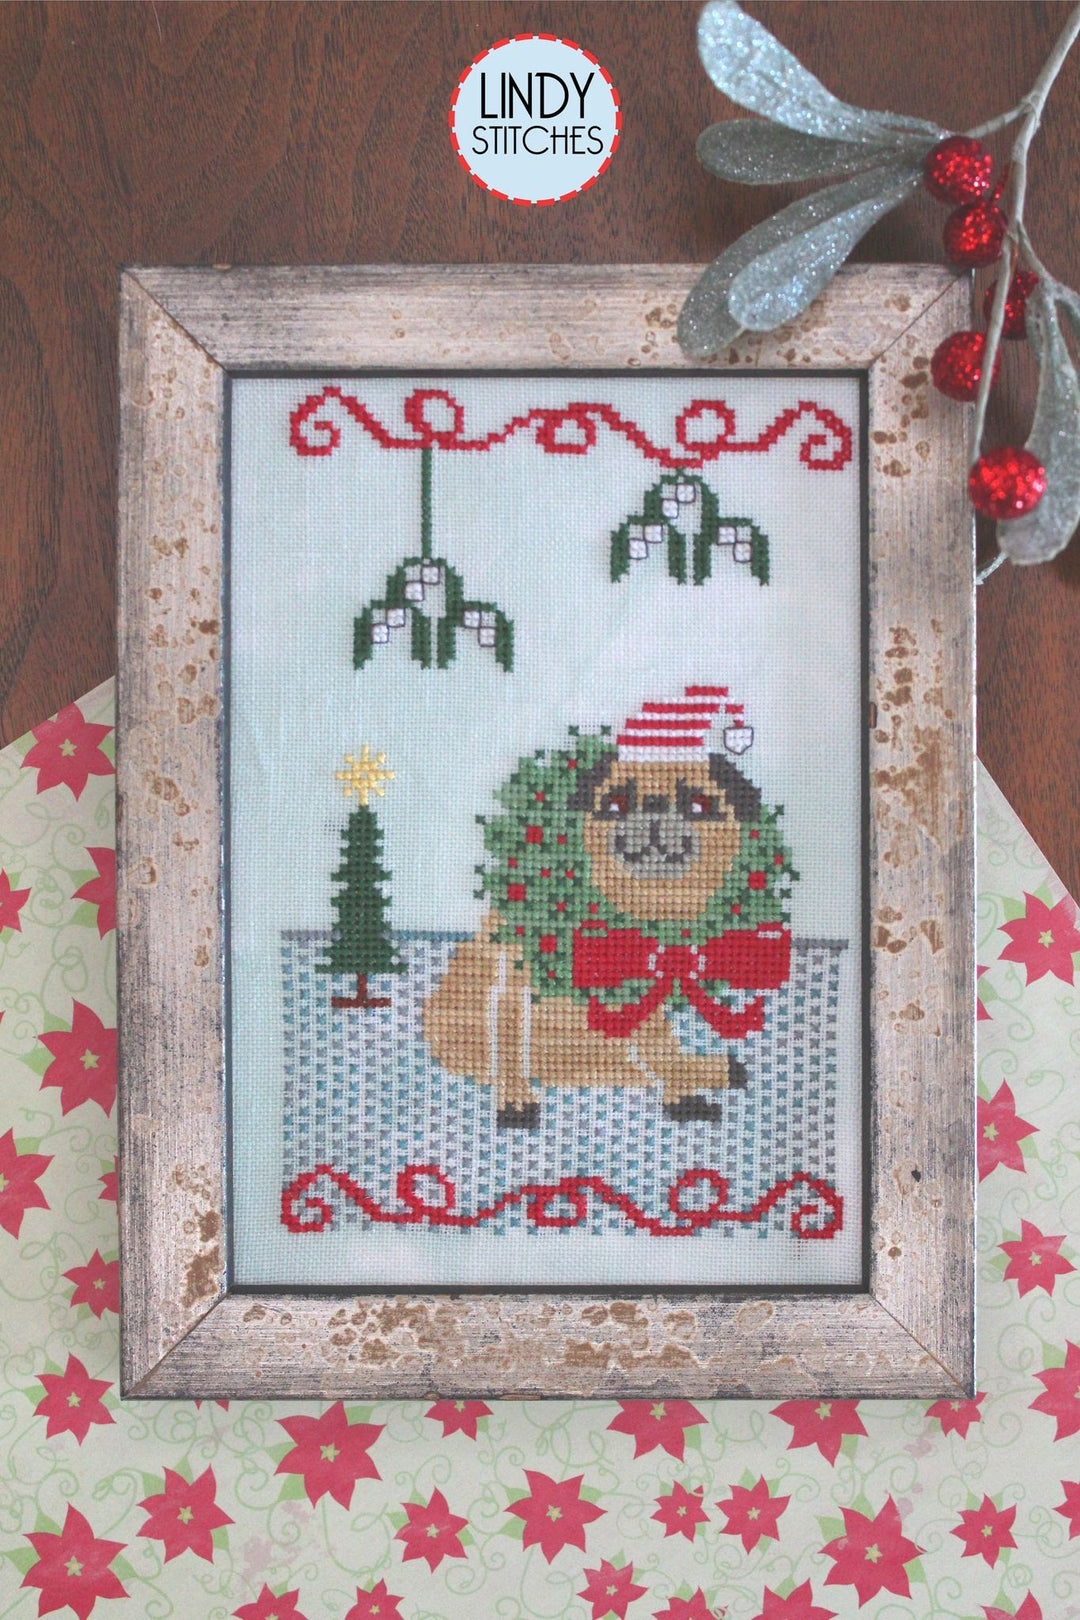 Posing in the Mistletoe | Lindy Stitches